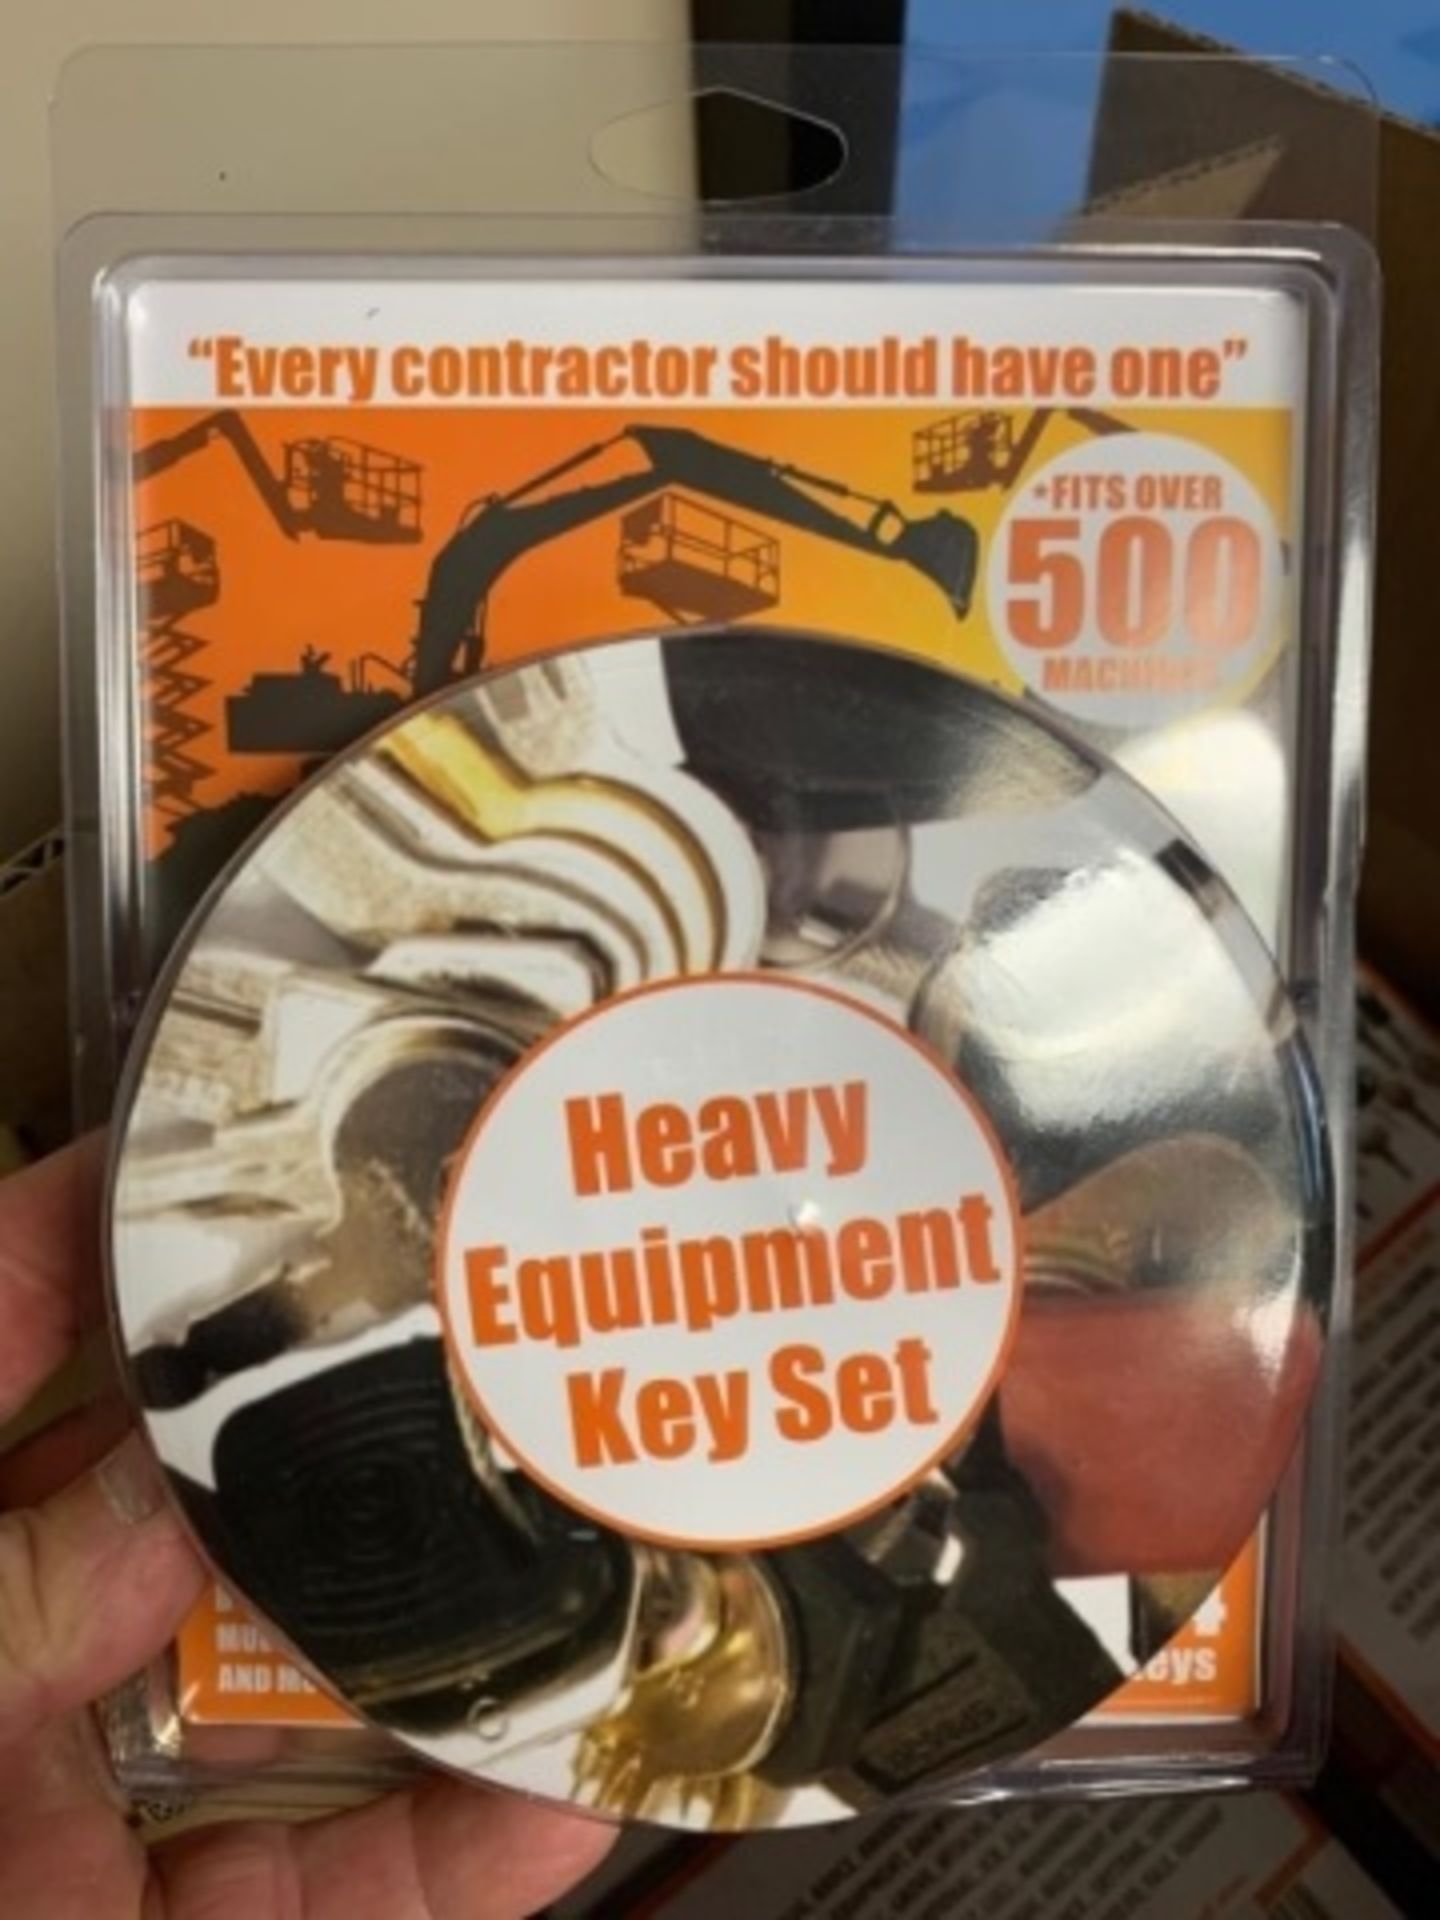 New Unused Heavy Equipment 24-Key Set, Fits Over 500 Different Machines